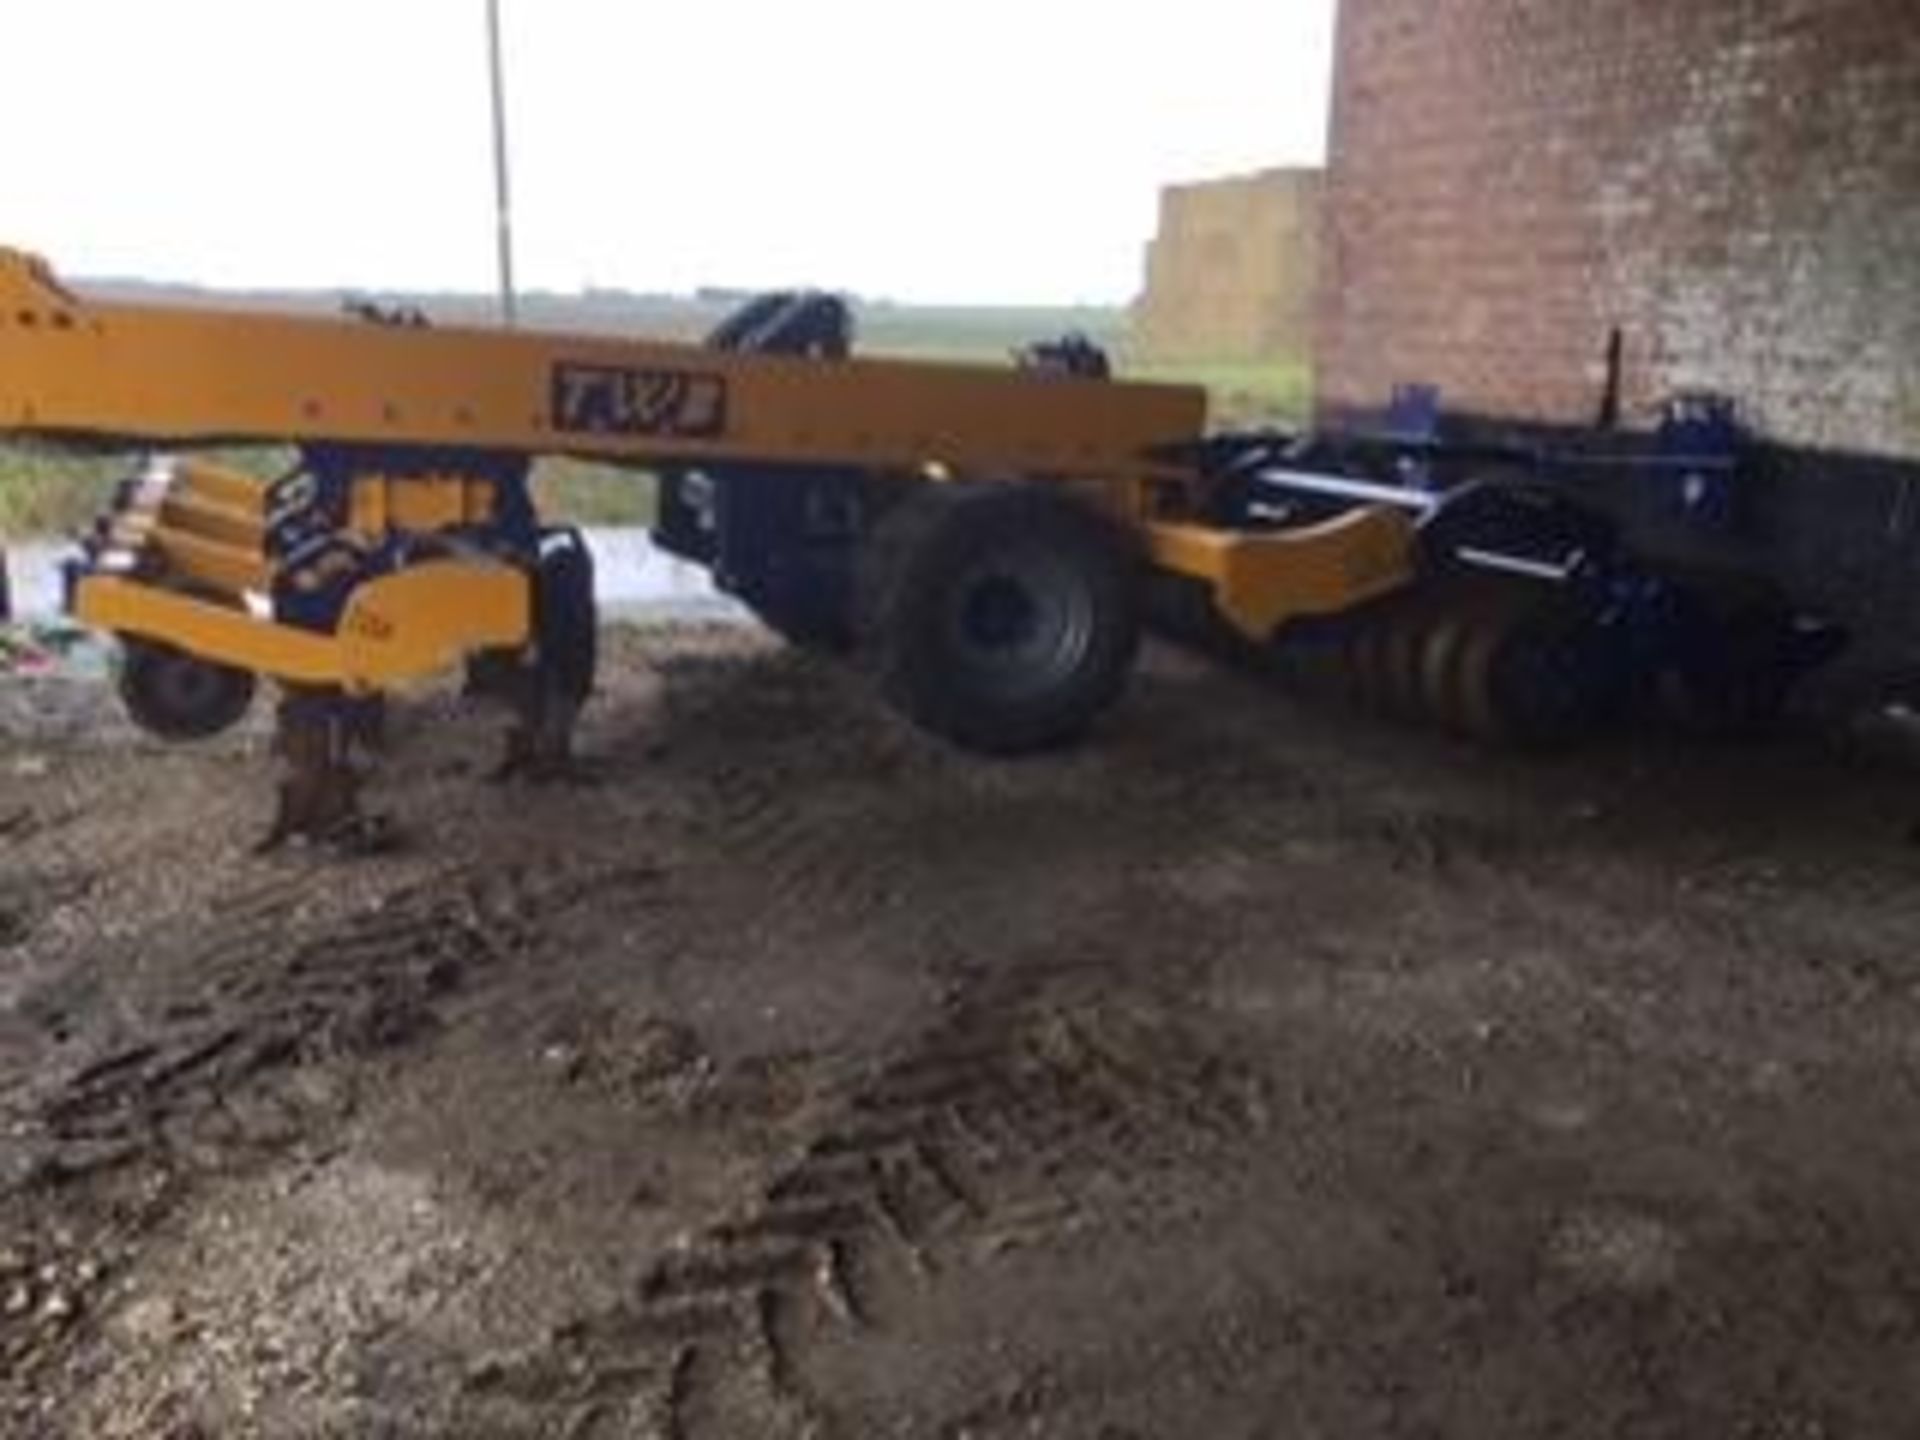 2015 TWB 4M TRAILED SUBSOILER, HYDRAULIC FOLDING, FRONT CUTTING DISCS, DOUBLE DD REAR PACKER - Image 19 of 19